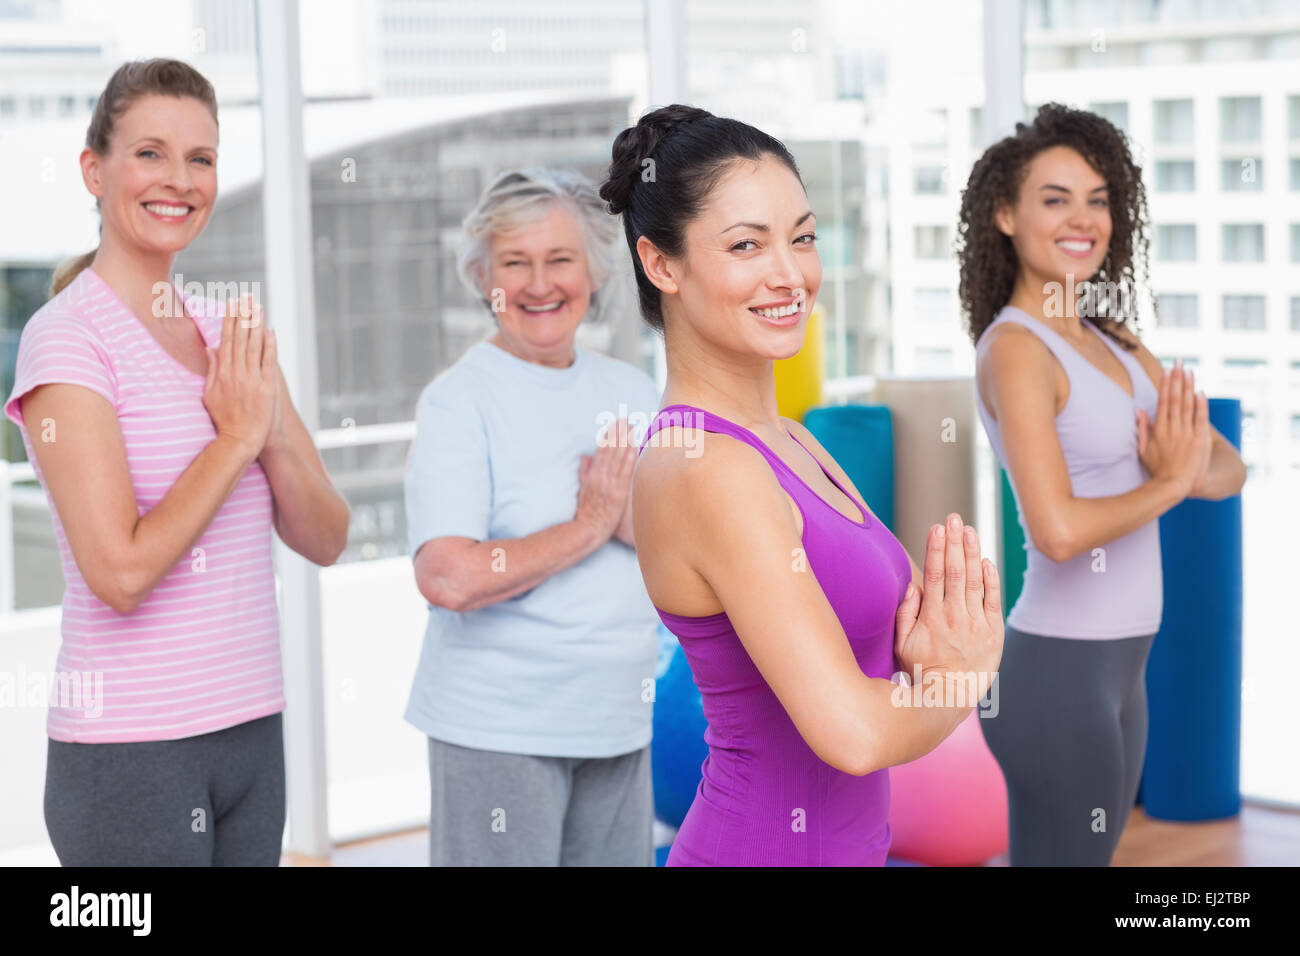 Friends with hands clasped standing in gym Stock Photo